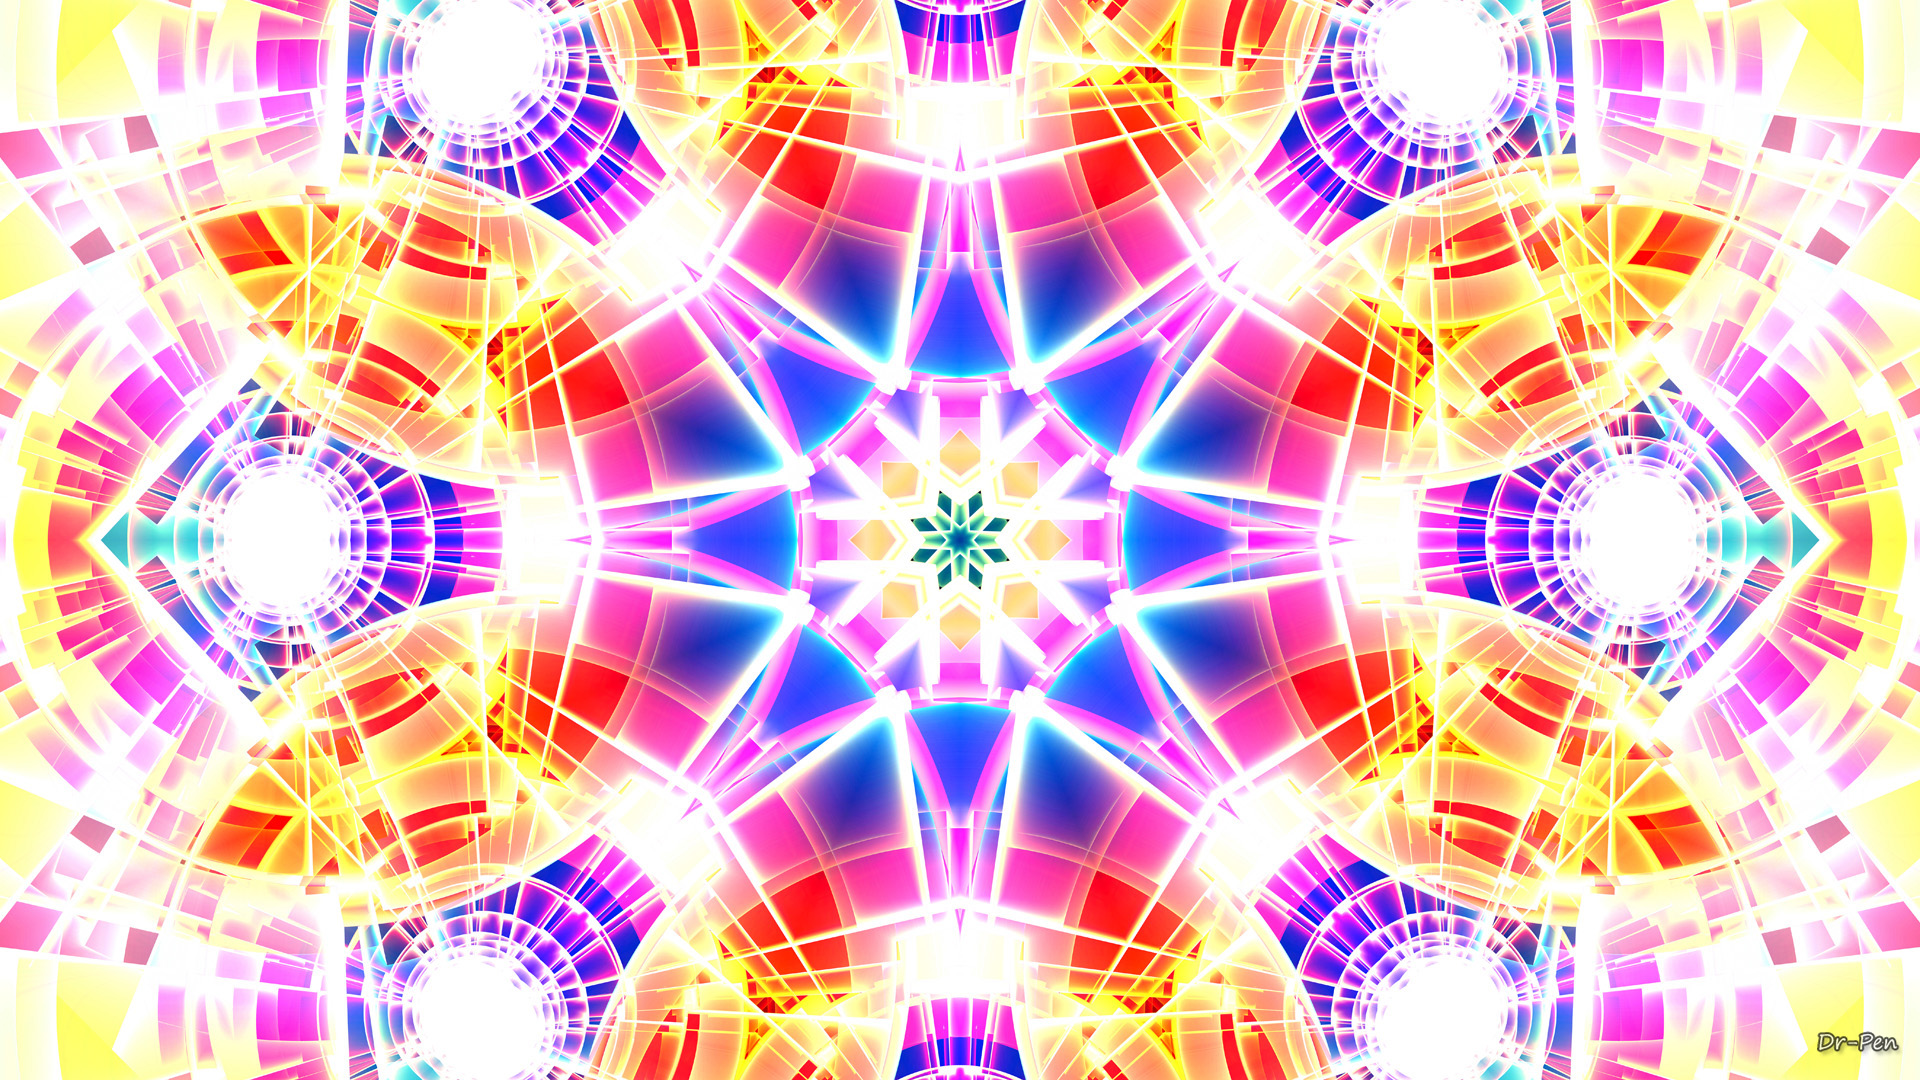 abstract, pattern, blue, bright, colorful, colors, mandala, manipulation, orange (color), purple, rainbow, red, spectrum, yellow